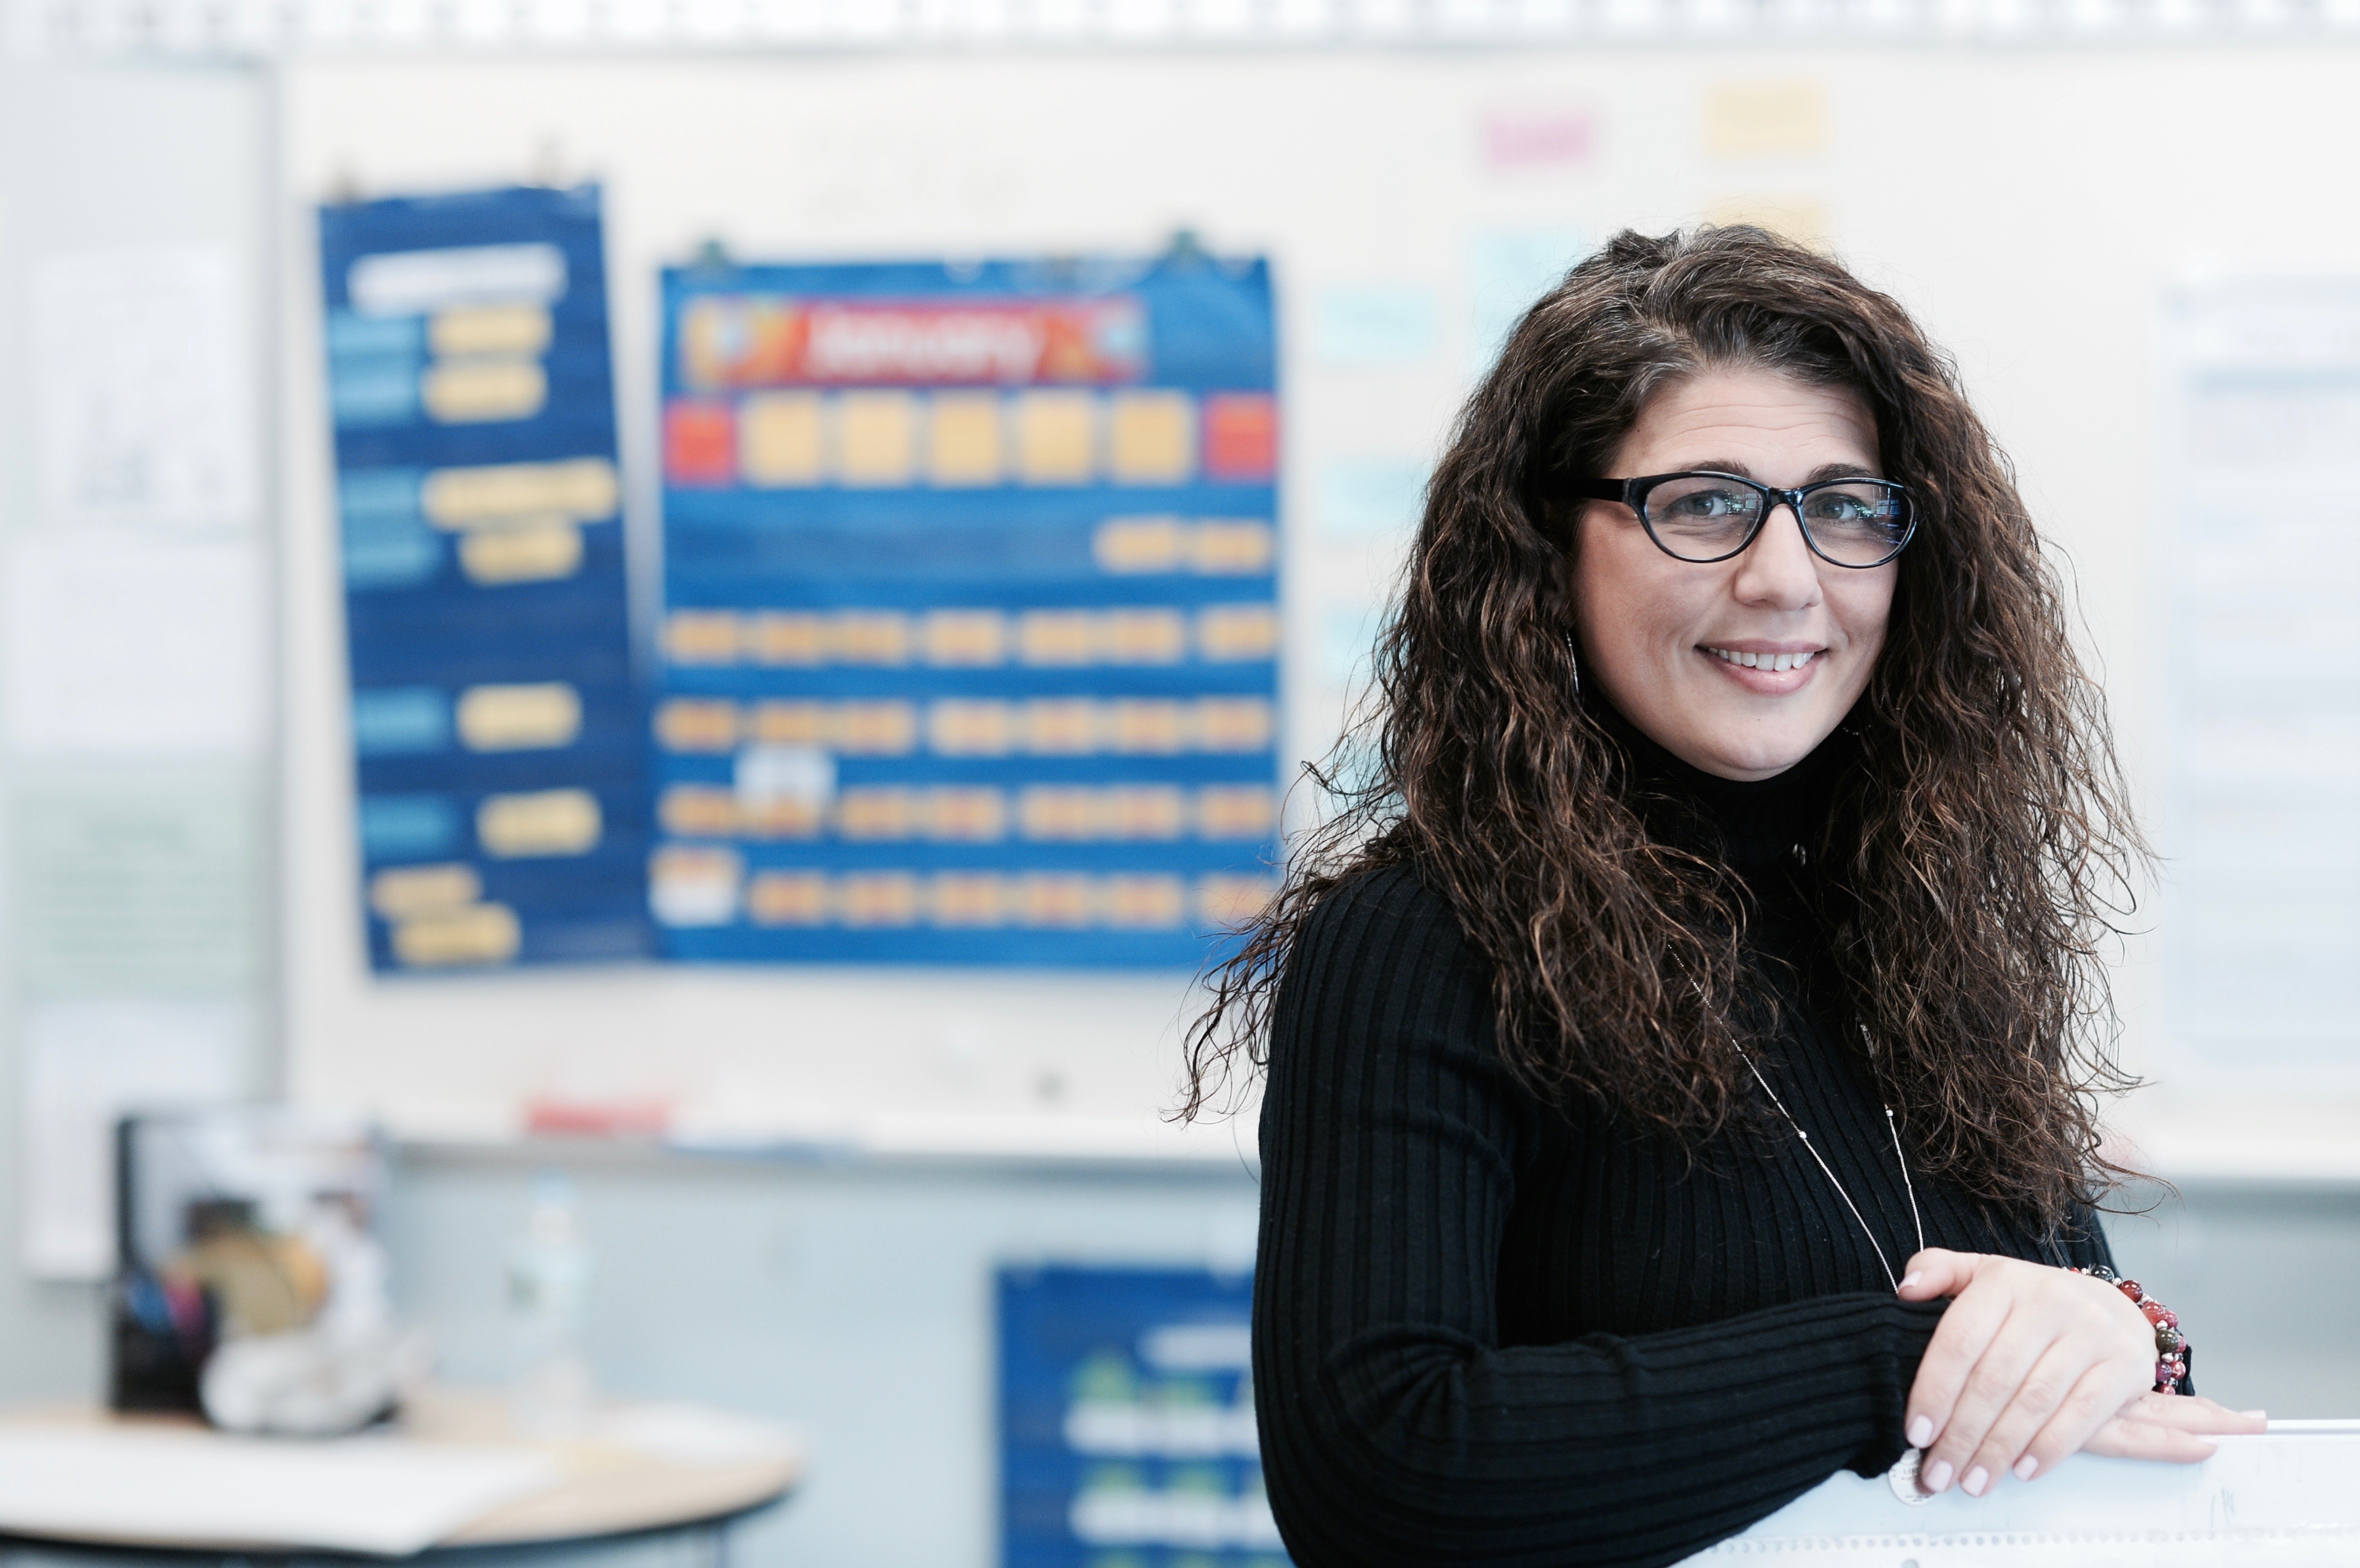 Angela LaVeglia graduated from NYSCAS and GSE, and is now a successful special-ed teacher at PS 307 in Queens.